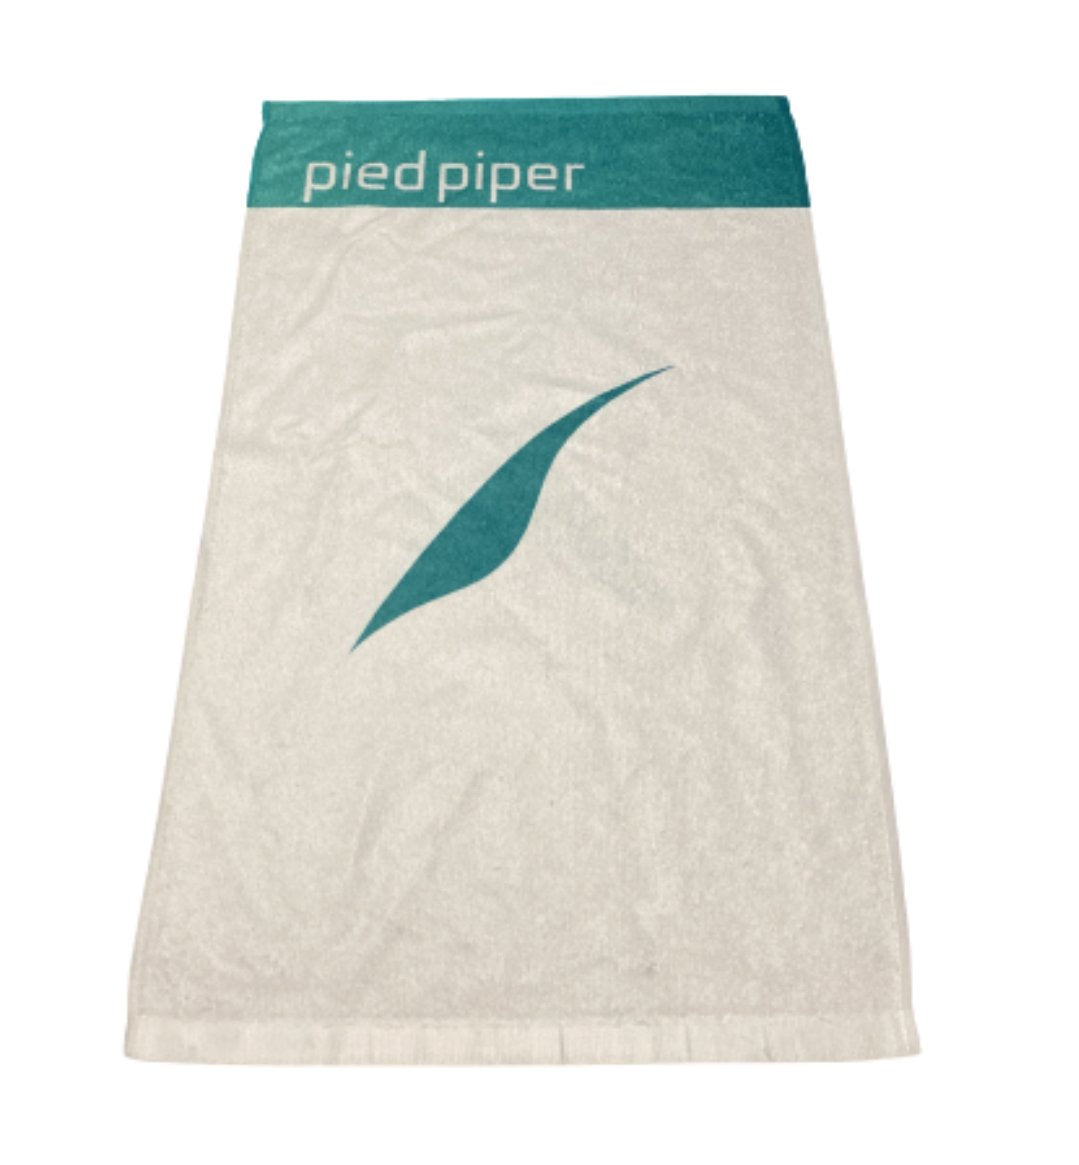 SILICON VALLEY: Jared’s Pied Piper 4.0 Towel